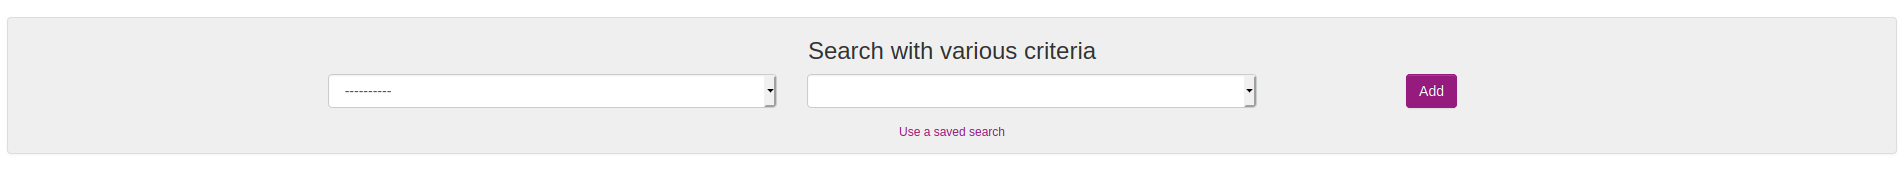 Use a saved search